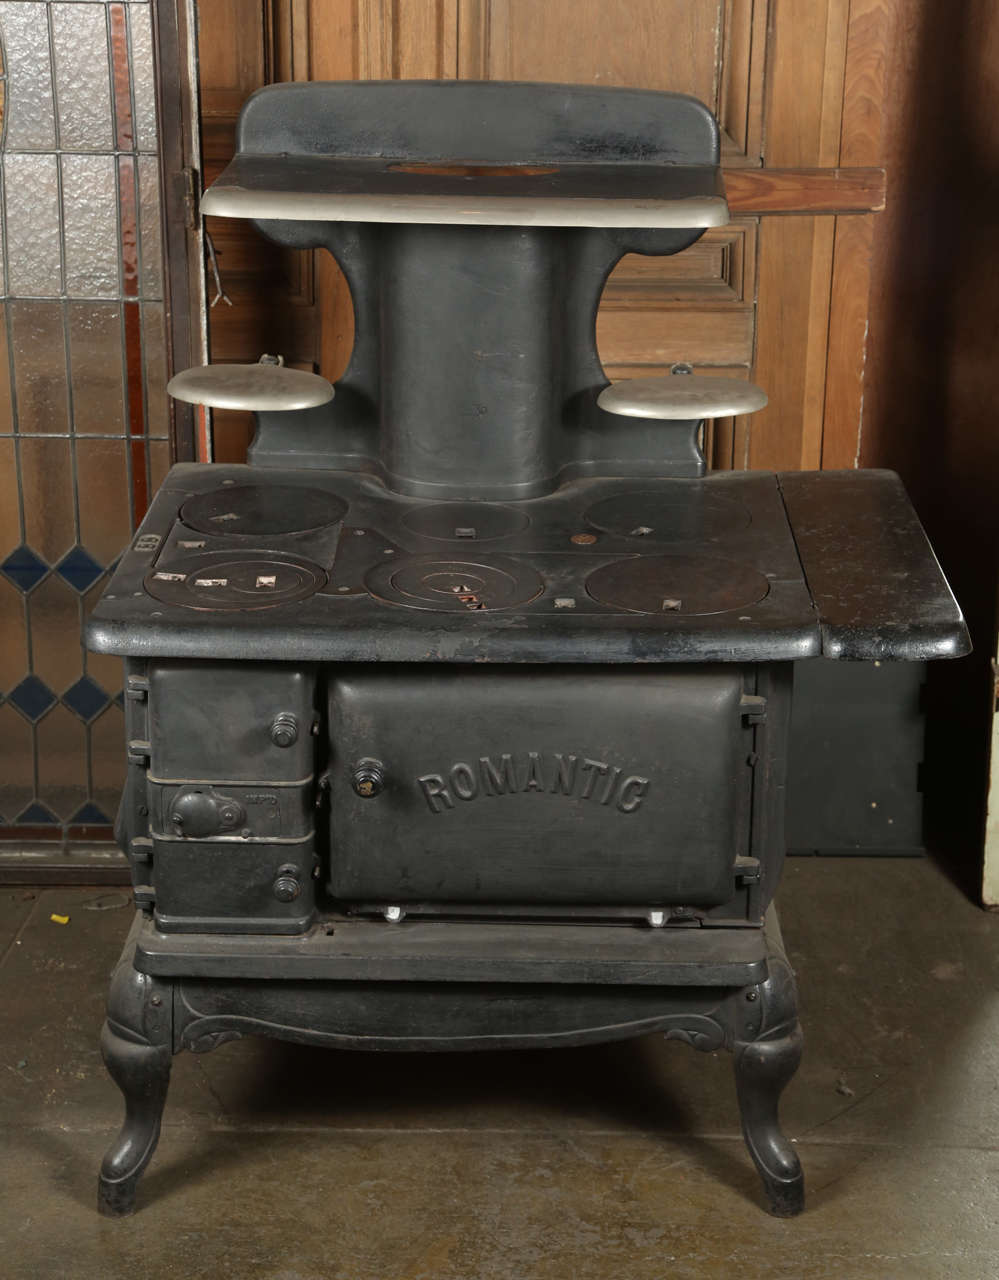 This is a turn of the century coal and wood burning stove. Unusual in that most were made to either burn wood or coal. That was a high end model at the time. Still usable for baking, cooking, etc.